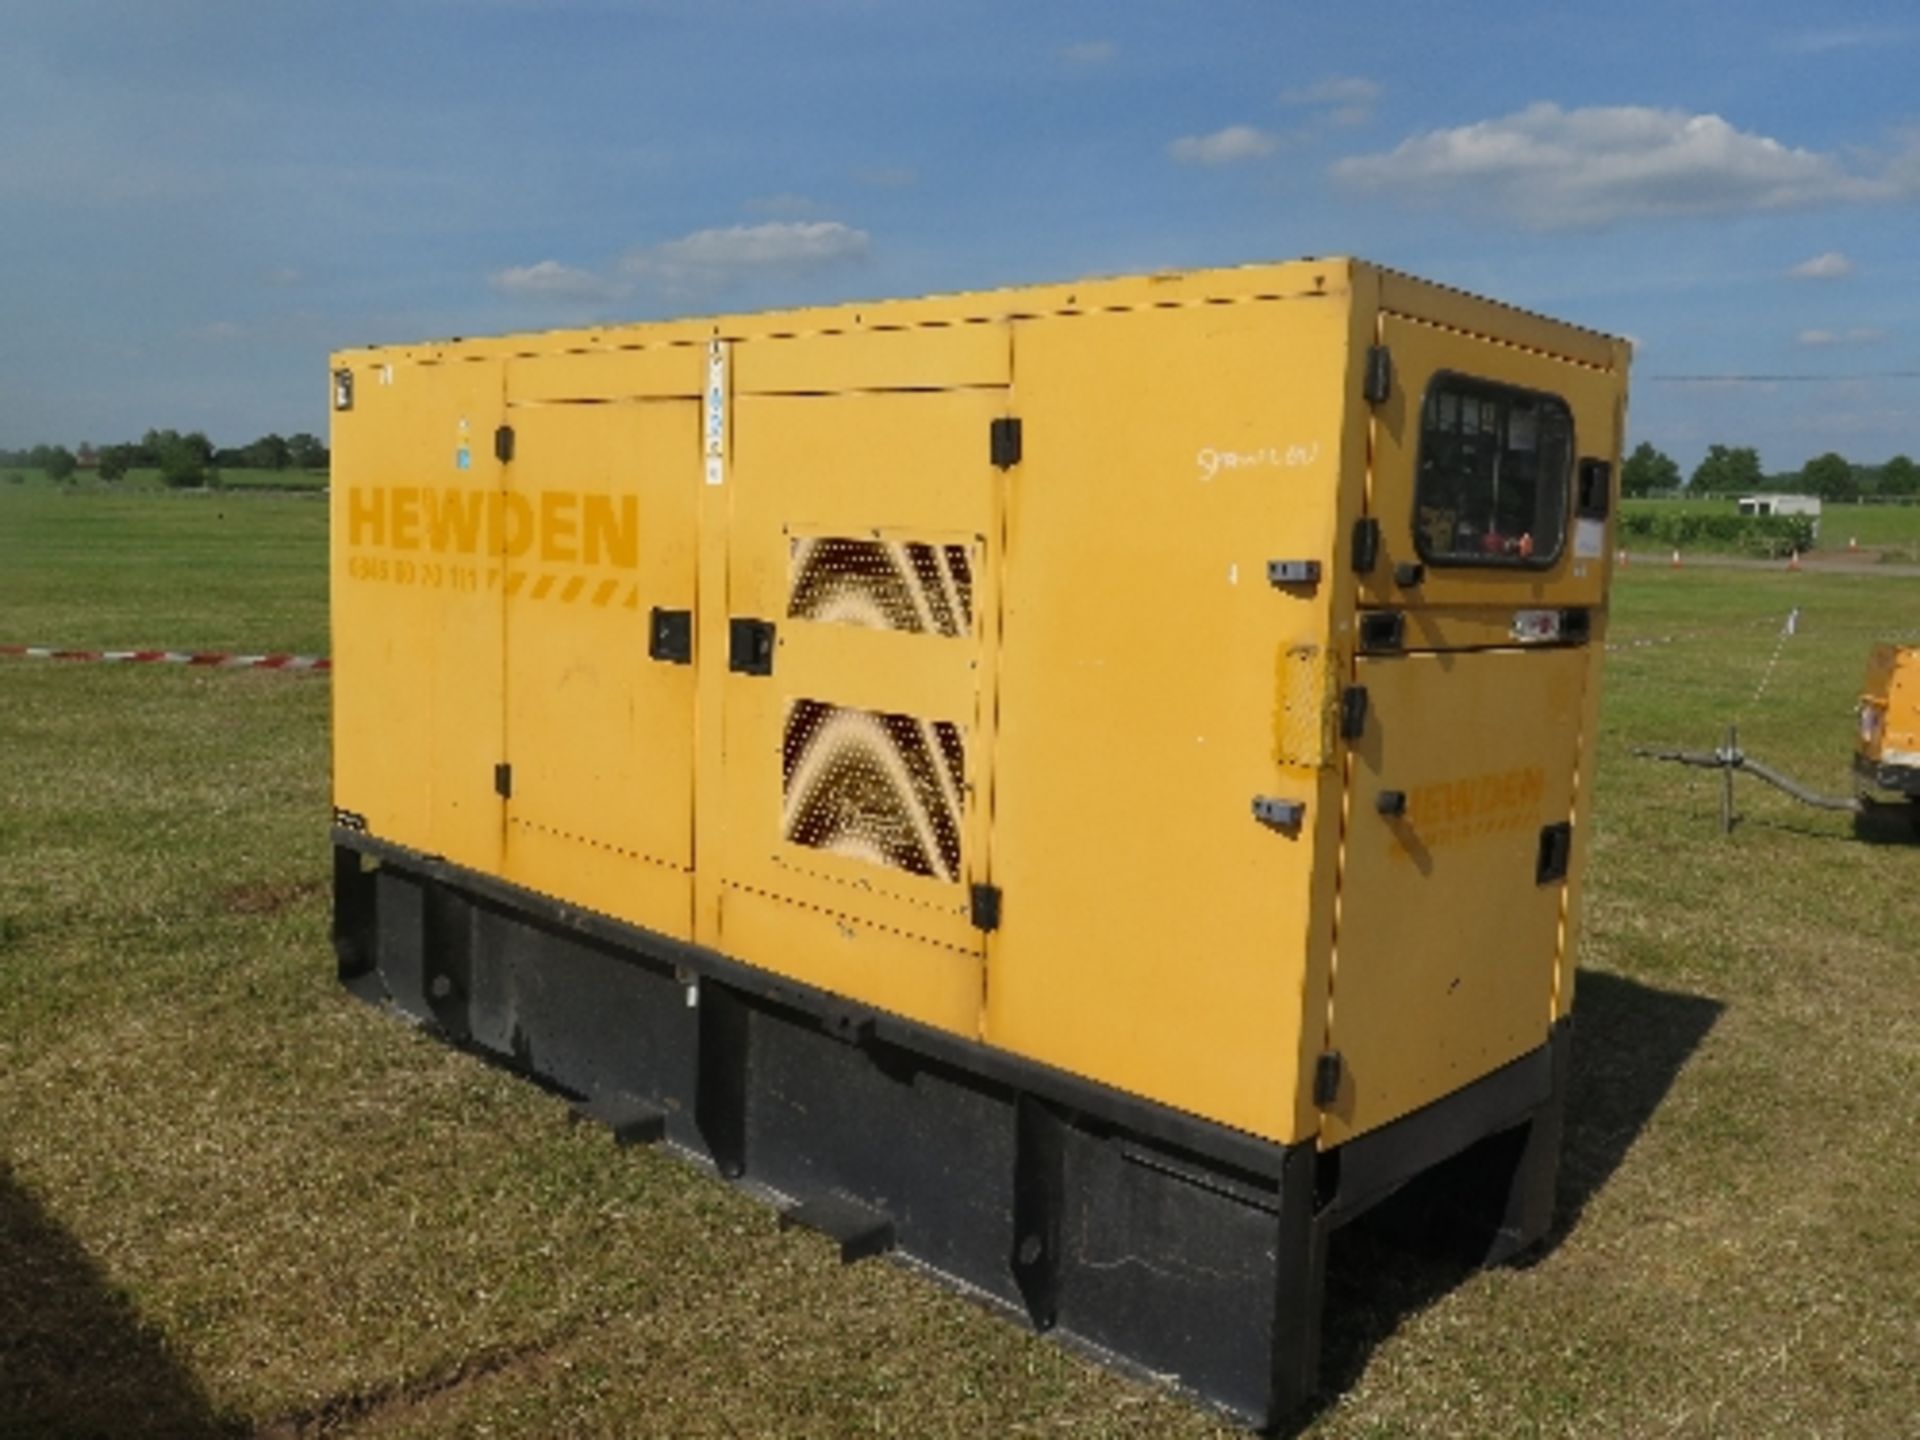 Caterpillar XQE100 generator 158072 12811 hrs
PERKINS - RUNS AND MAKES POWER
ALL LOTS are SOLD